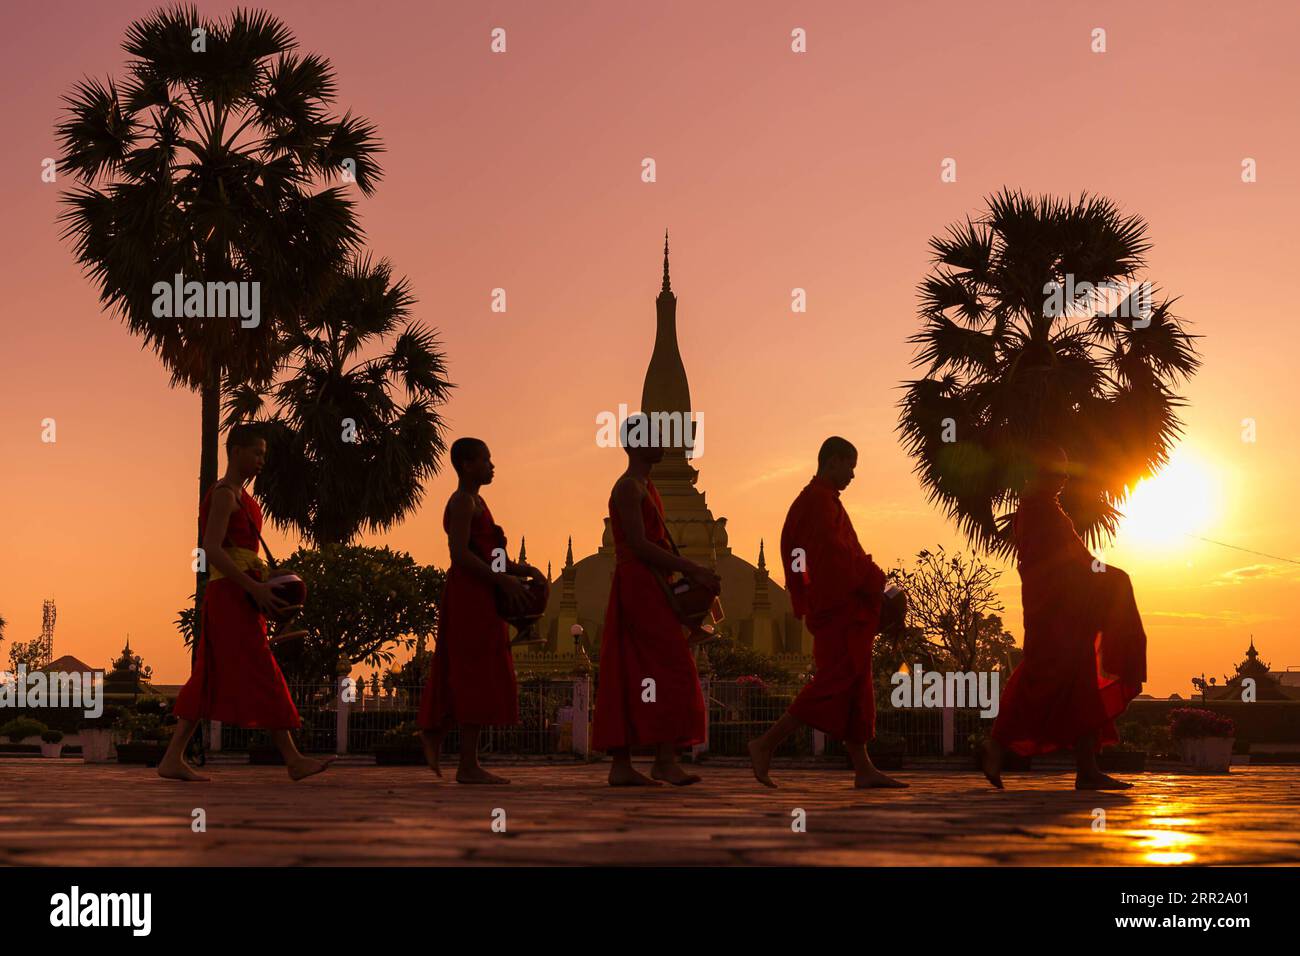 201007 -- VIENTIANE, Oct. 7, 2020 -- Monks pass by That Luang Stupa in Vientiane, Laos, on Oct. 26, 2019. Laos is the only landlocked country in Southeast Asia. In the central part of the country, the capital Vientiane is located on the alluvial plain on the Mekong River, suitable for fishing and plantation. The Lan Xang Kingdom, the first unified multi-ethnic nation in the history of Laos, moved its capital to Vientiane in the mid-16th century, and Vientiane gradually prospered. Photo by /Xinhua CitySketchLAOS-VIENTIANE KaikeoxSaiyasane PUBLICATIONxNOTxINxCHN Stock Photo